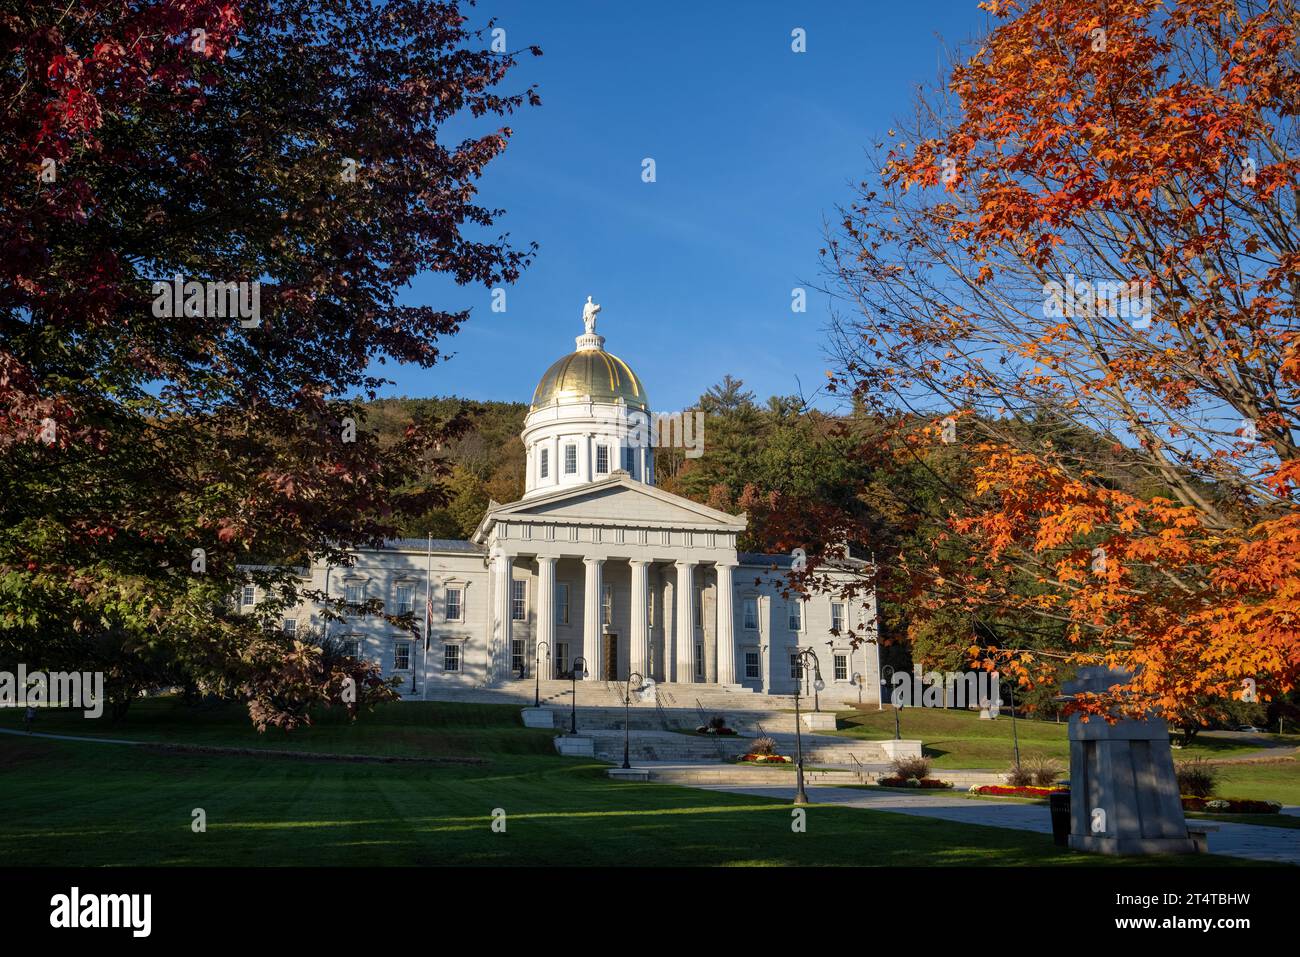 The Vermont State House, located in Montpelier, is the state capitol of the U.S. state of Vermont. Stock Photo